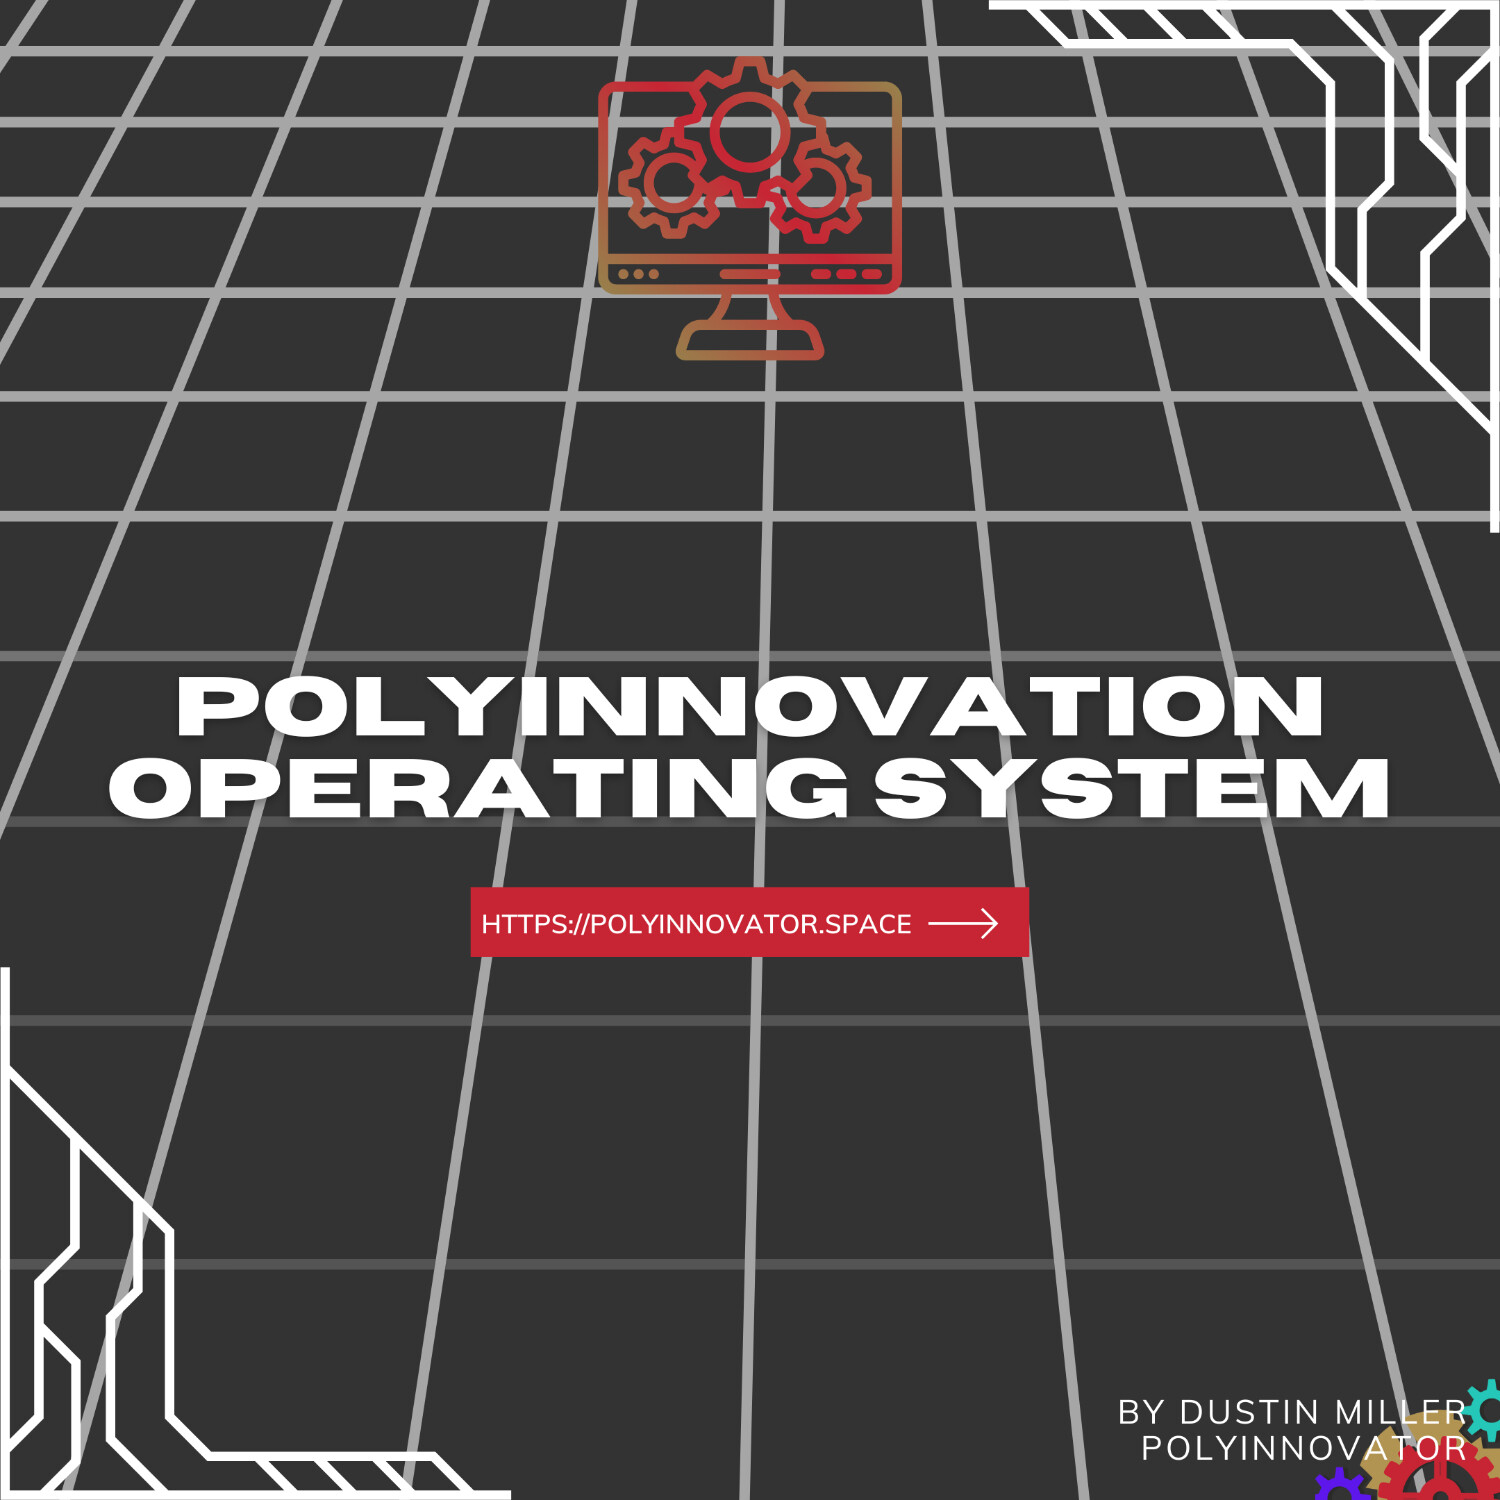 The New PolyInnovation Operating System #PIOS #PolyInContent